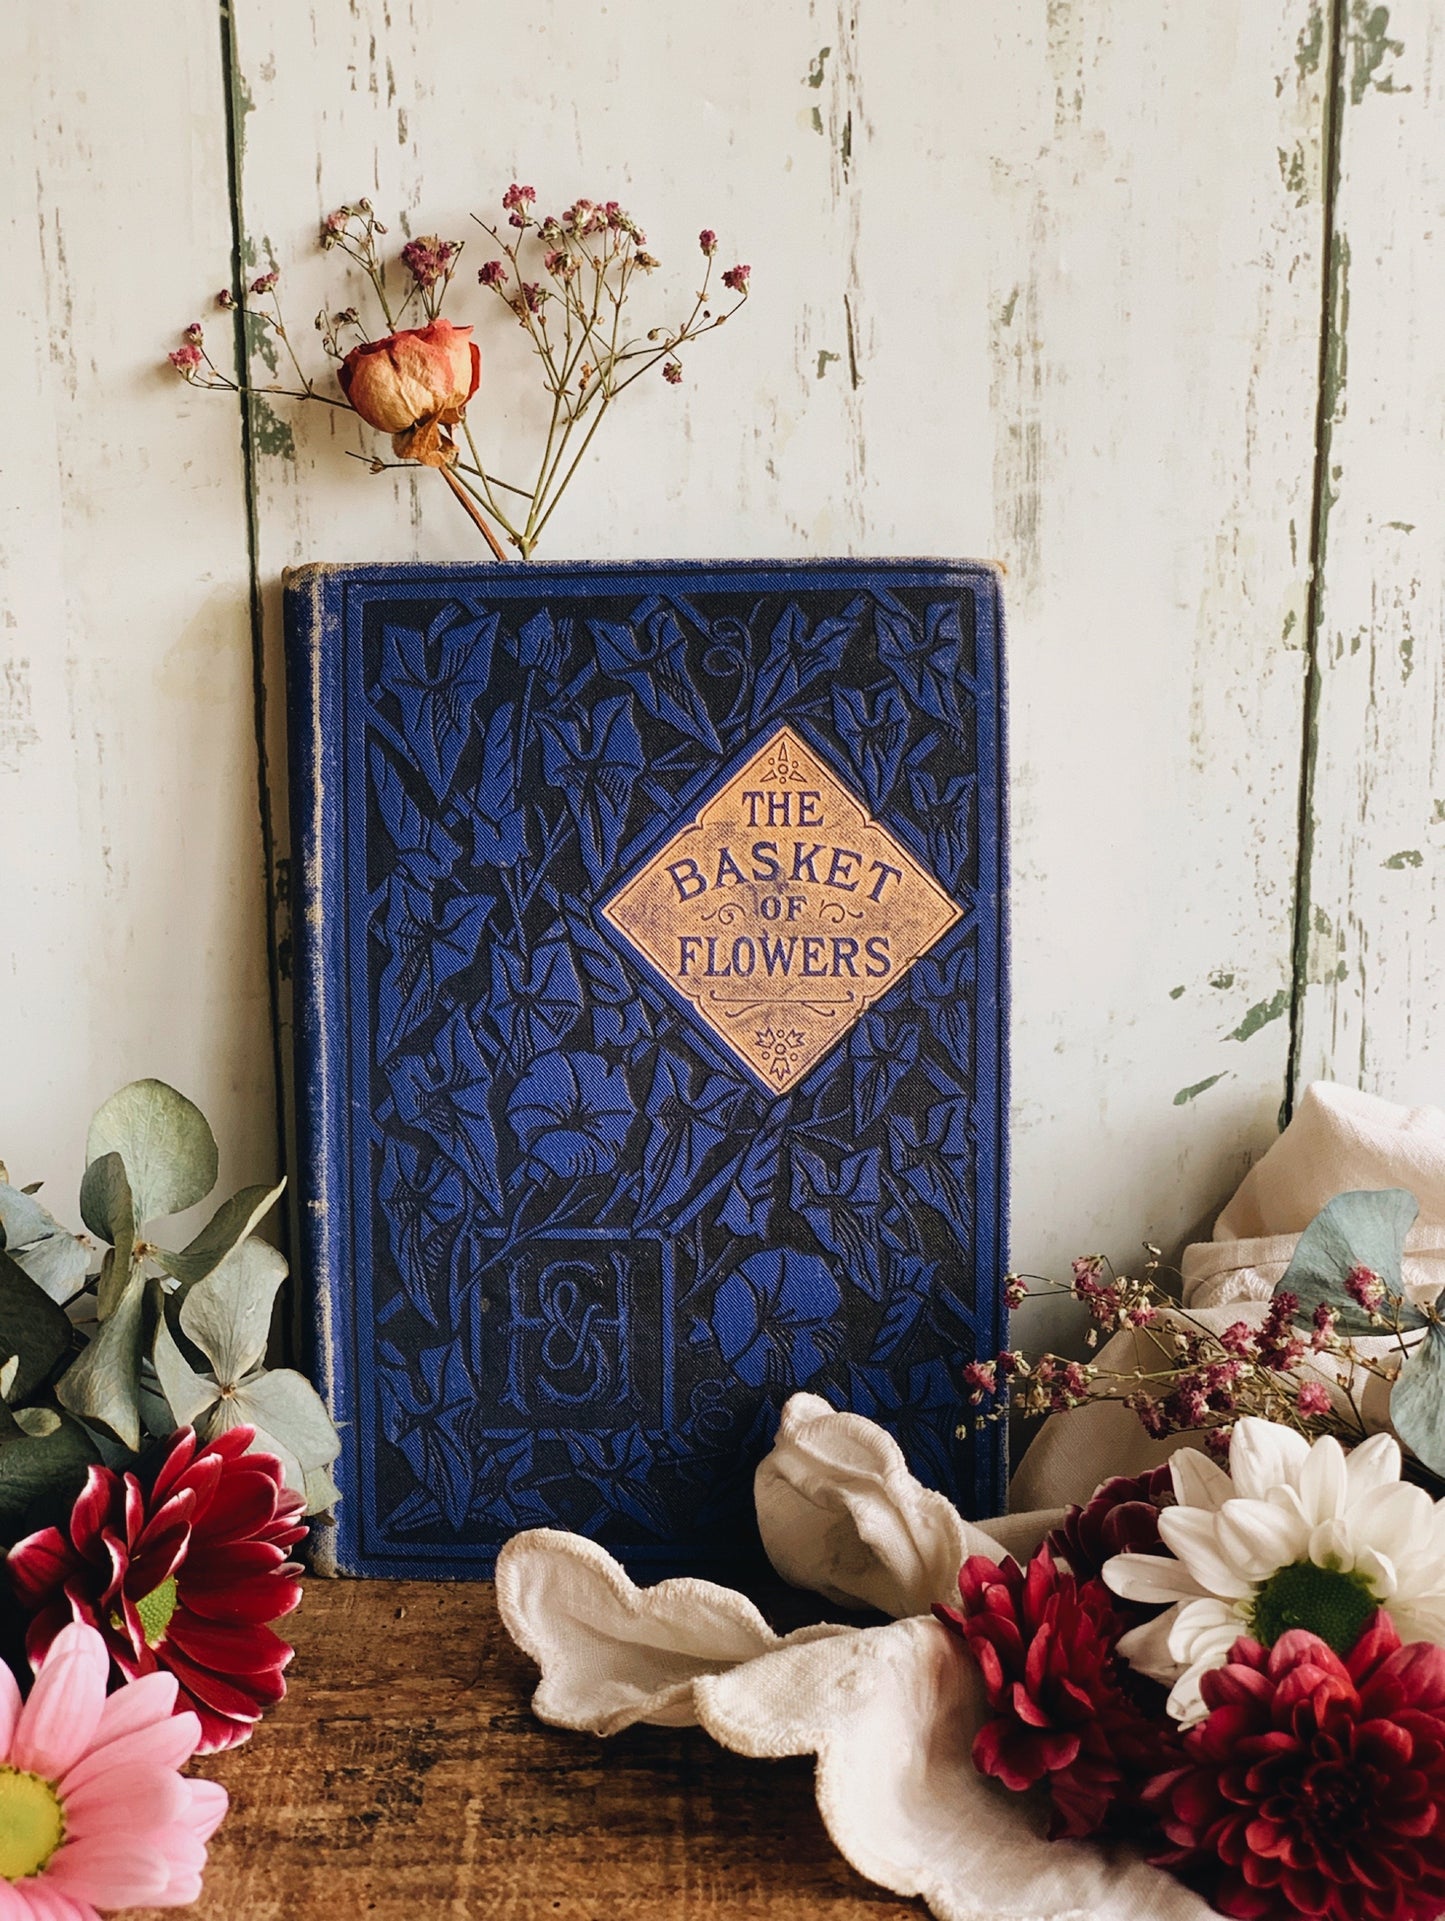 Antique “The Basket of Flowers” Book (Houston & Sons London)